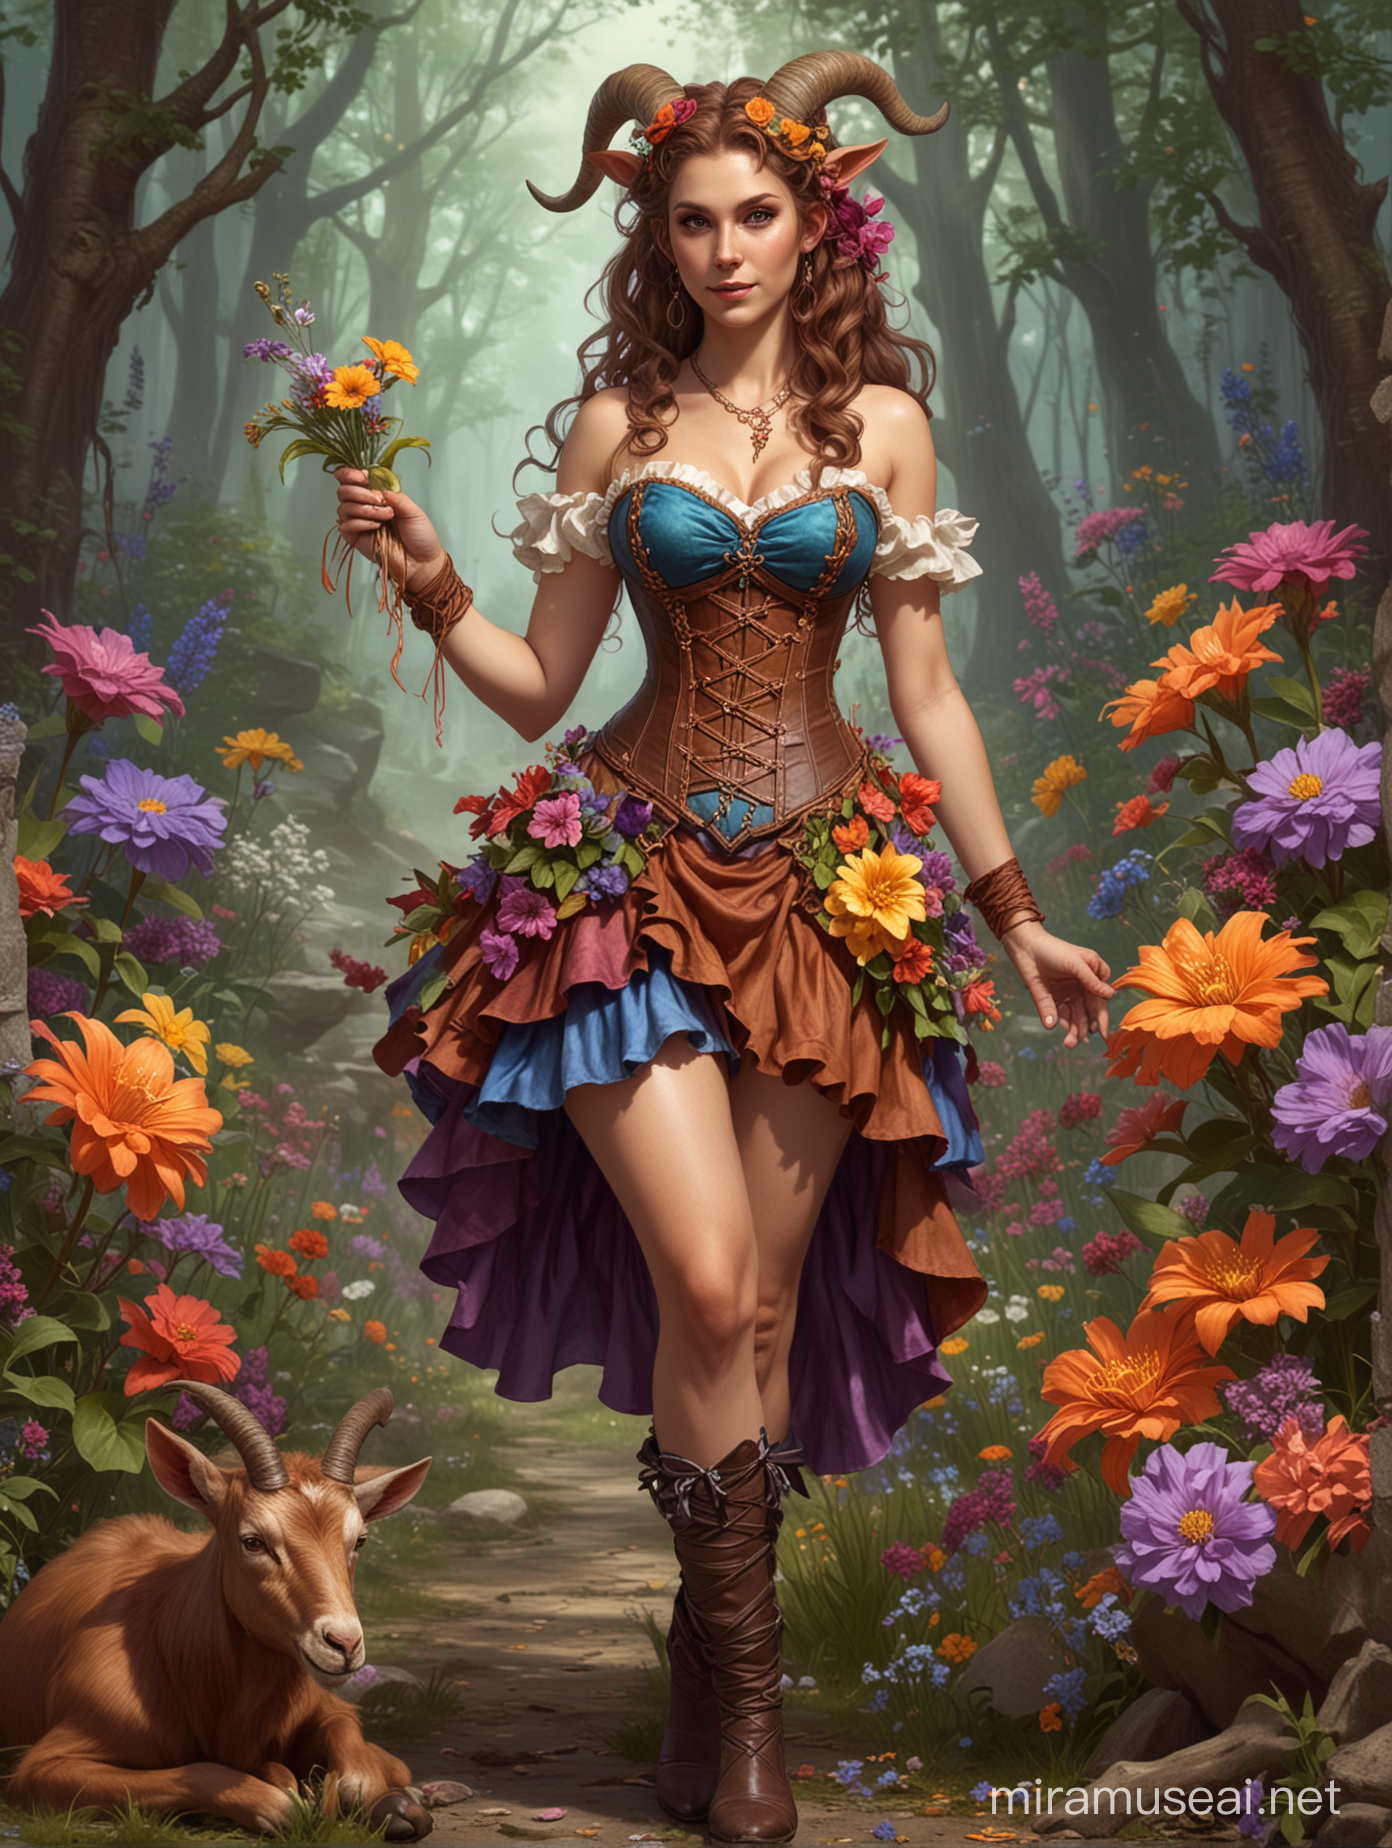 Colorful Corset Dress Satyr with Flowers in Hair